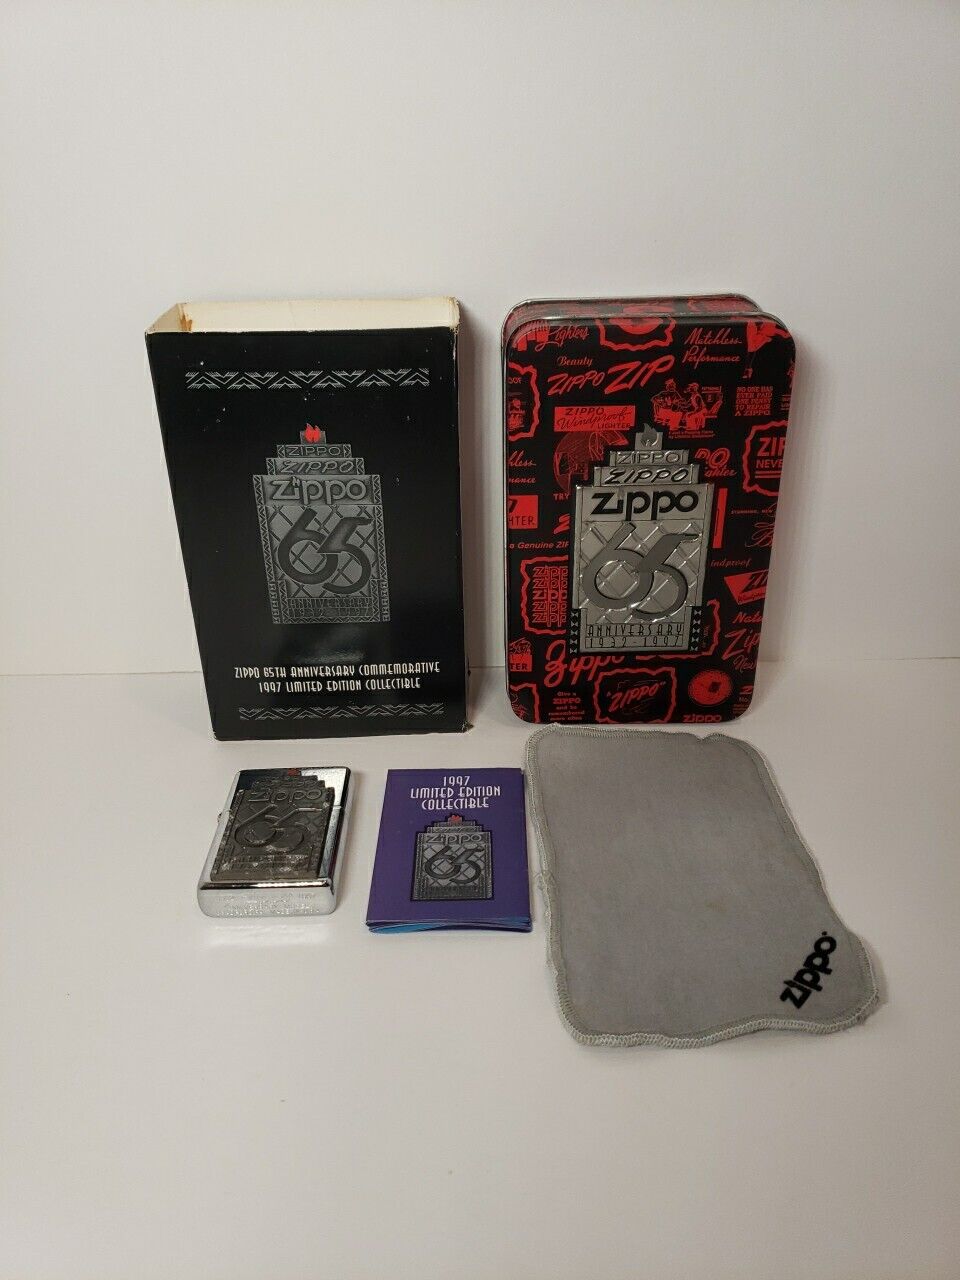 Zippo 1997 Lighter Limited Edition 65th Anniversary w/Collectible Tin & More 